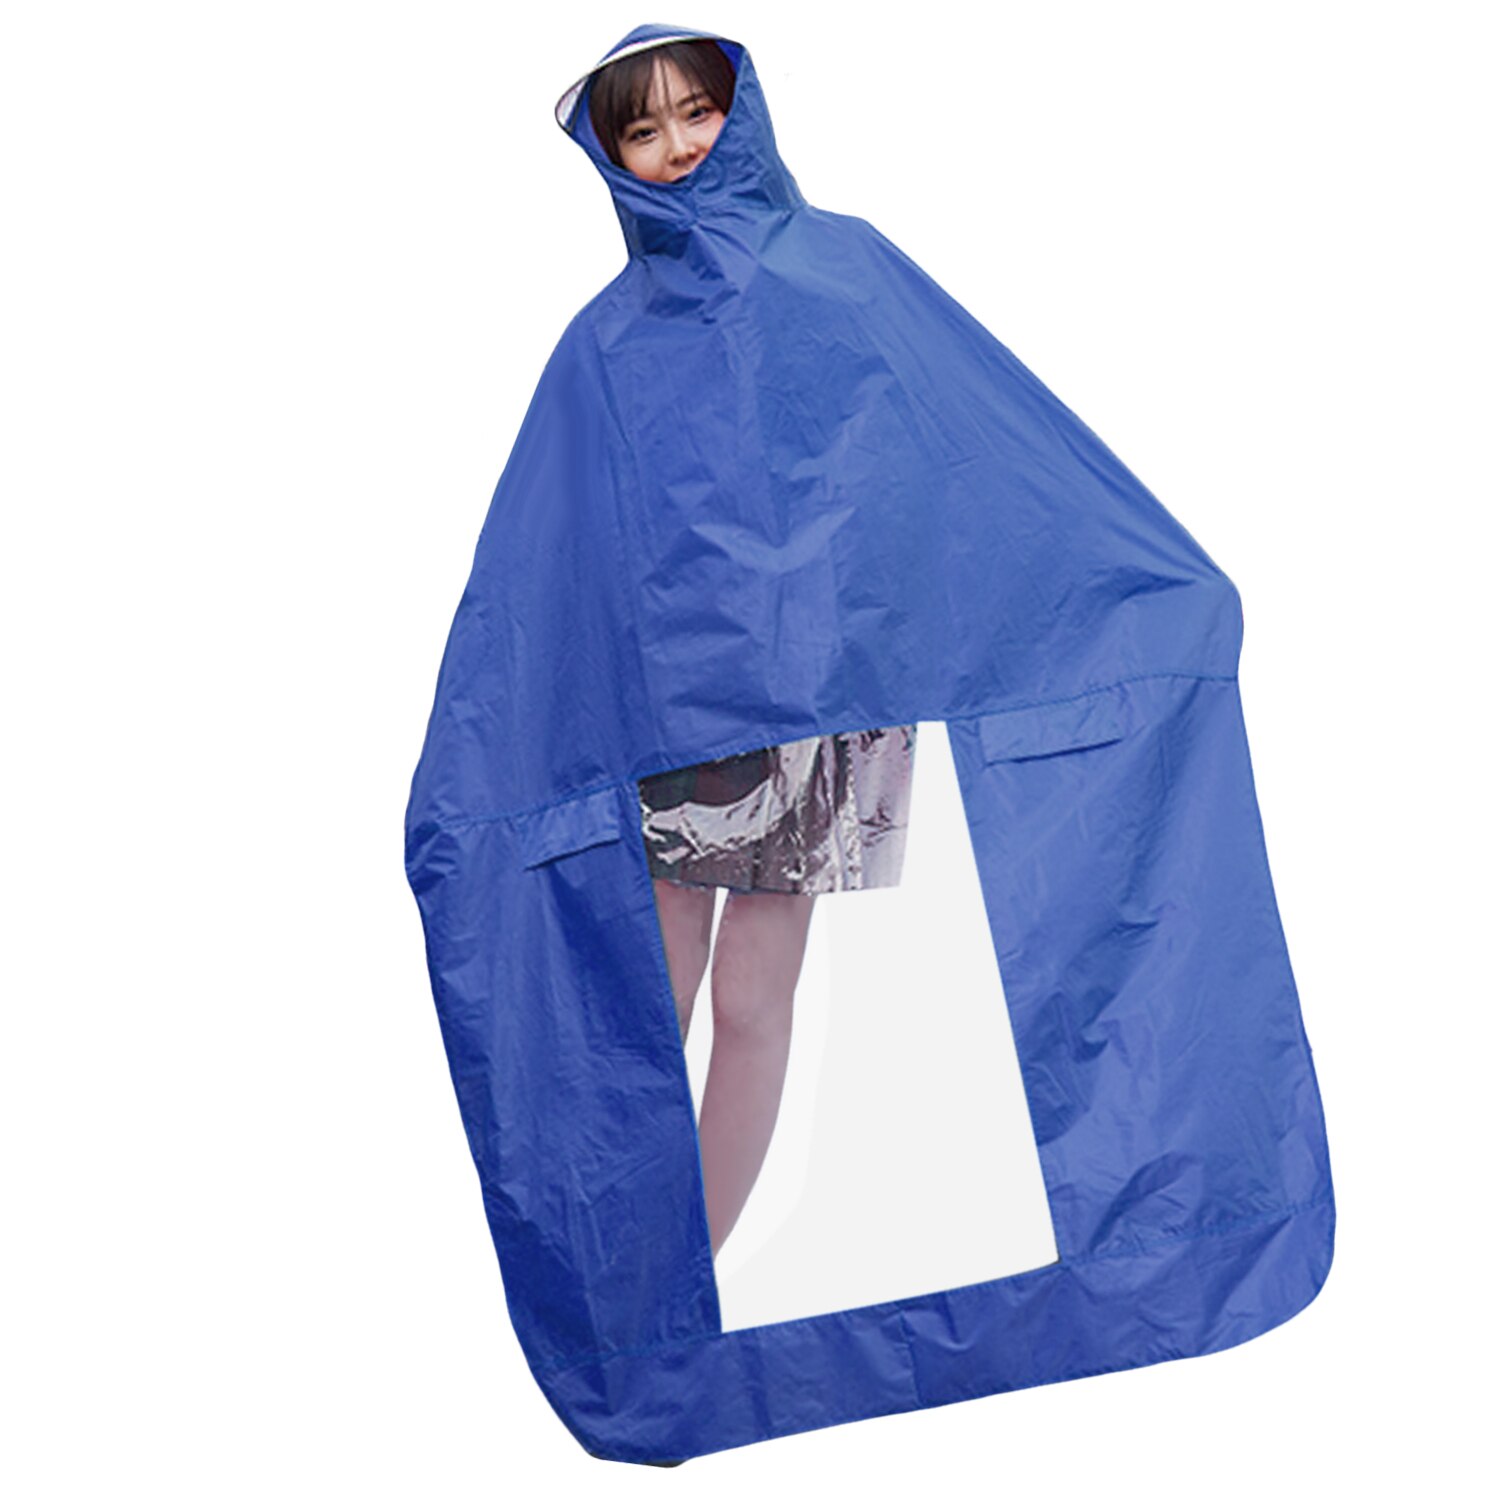 Behogar Universal Waterproof Hooded Raincoat Rain Cape Coat Poncho for Mobility Scooters Motorcycle Motorbikes Bicycle Blue